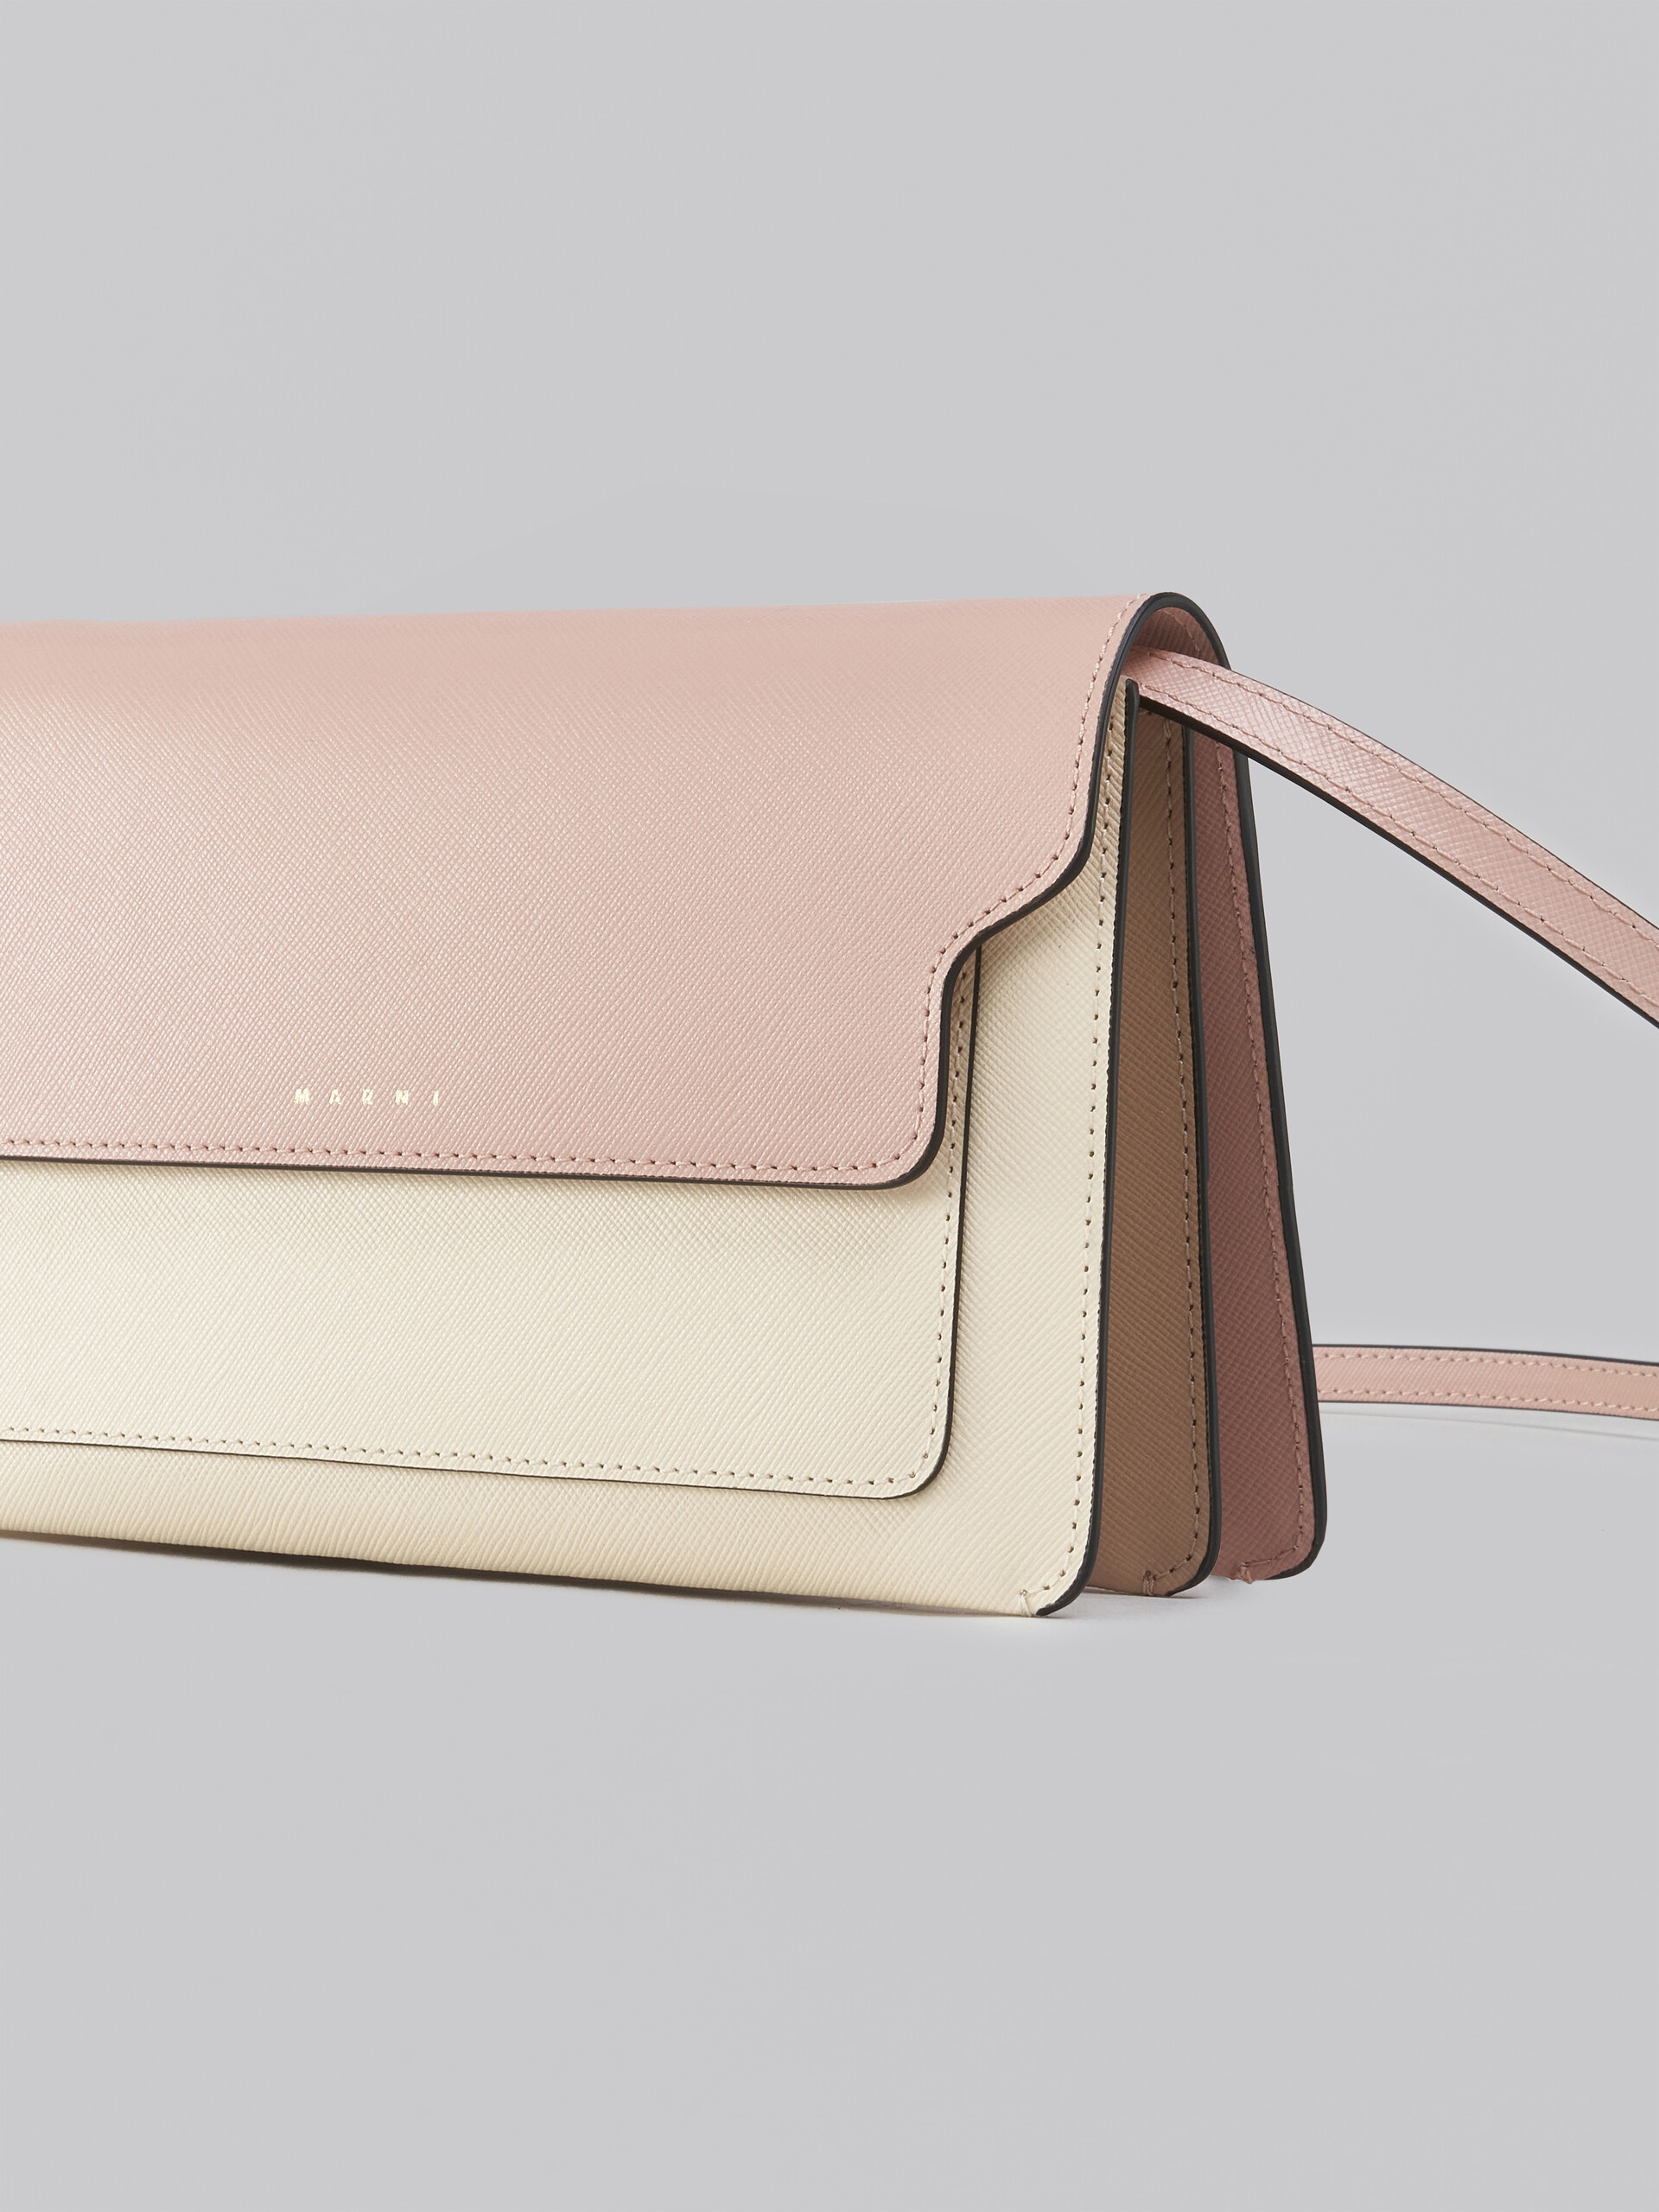 TRUNK CLUTCH IN PINK WHITE AND BEIGE SAFFIANO LEATHER - 5